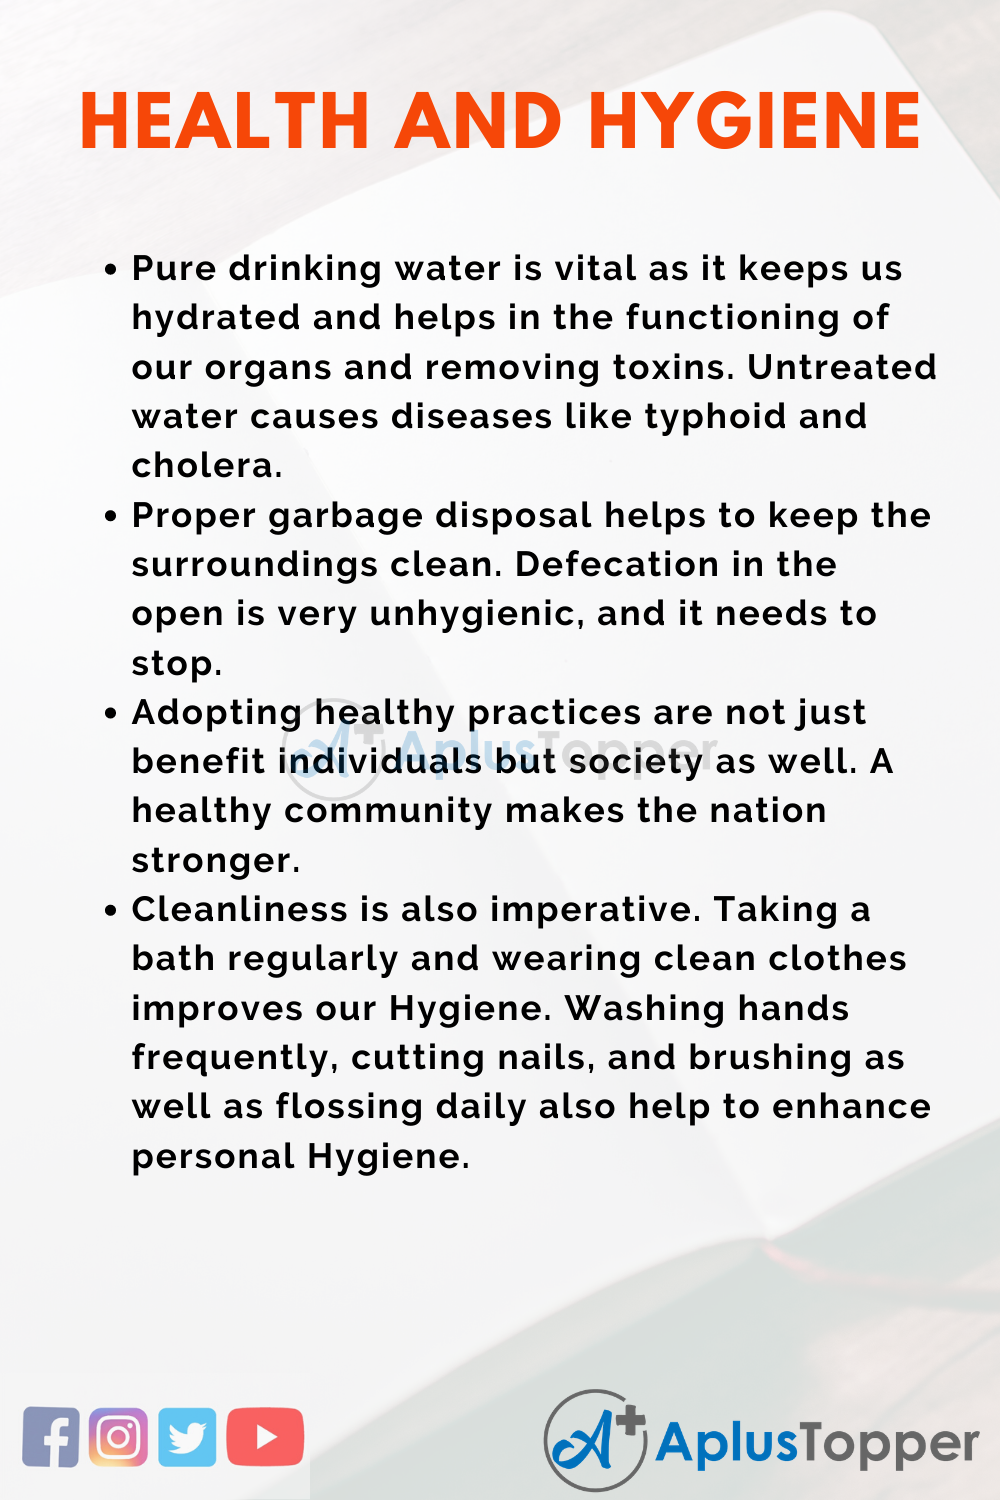 health and hygiene essay in english 200 words